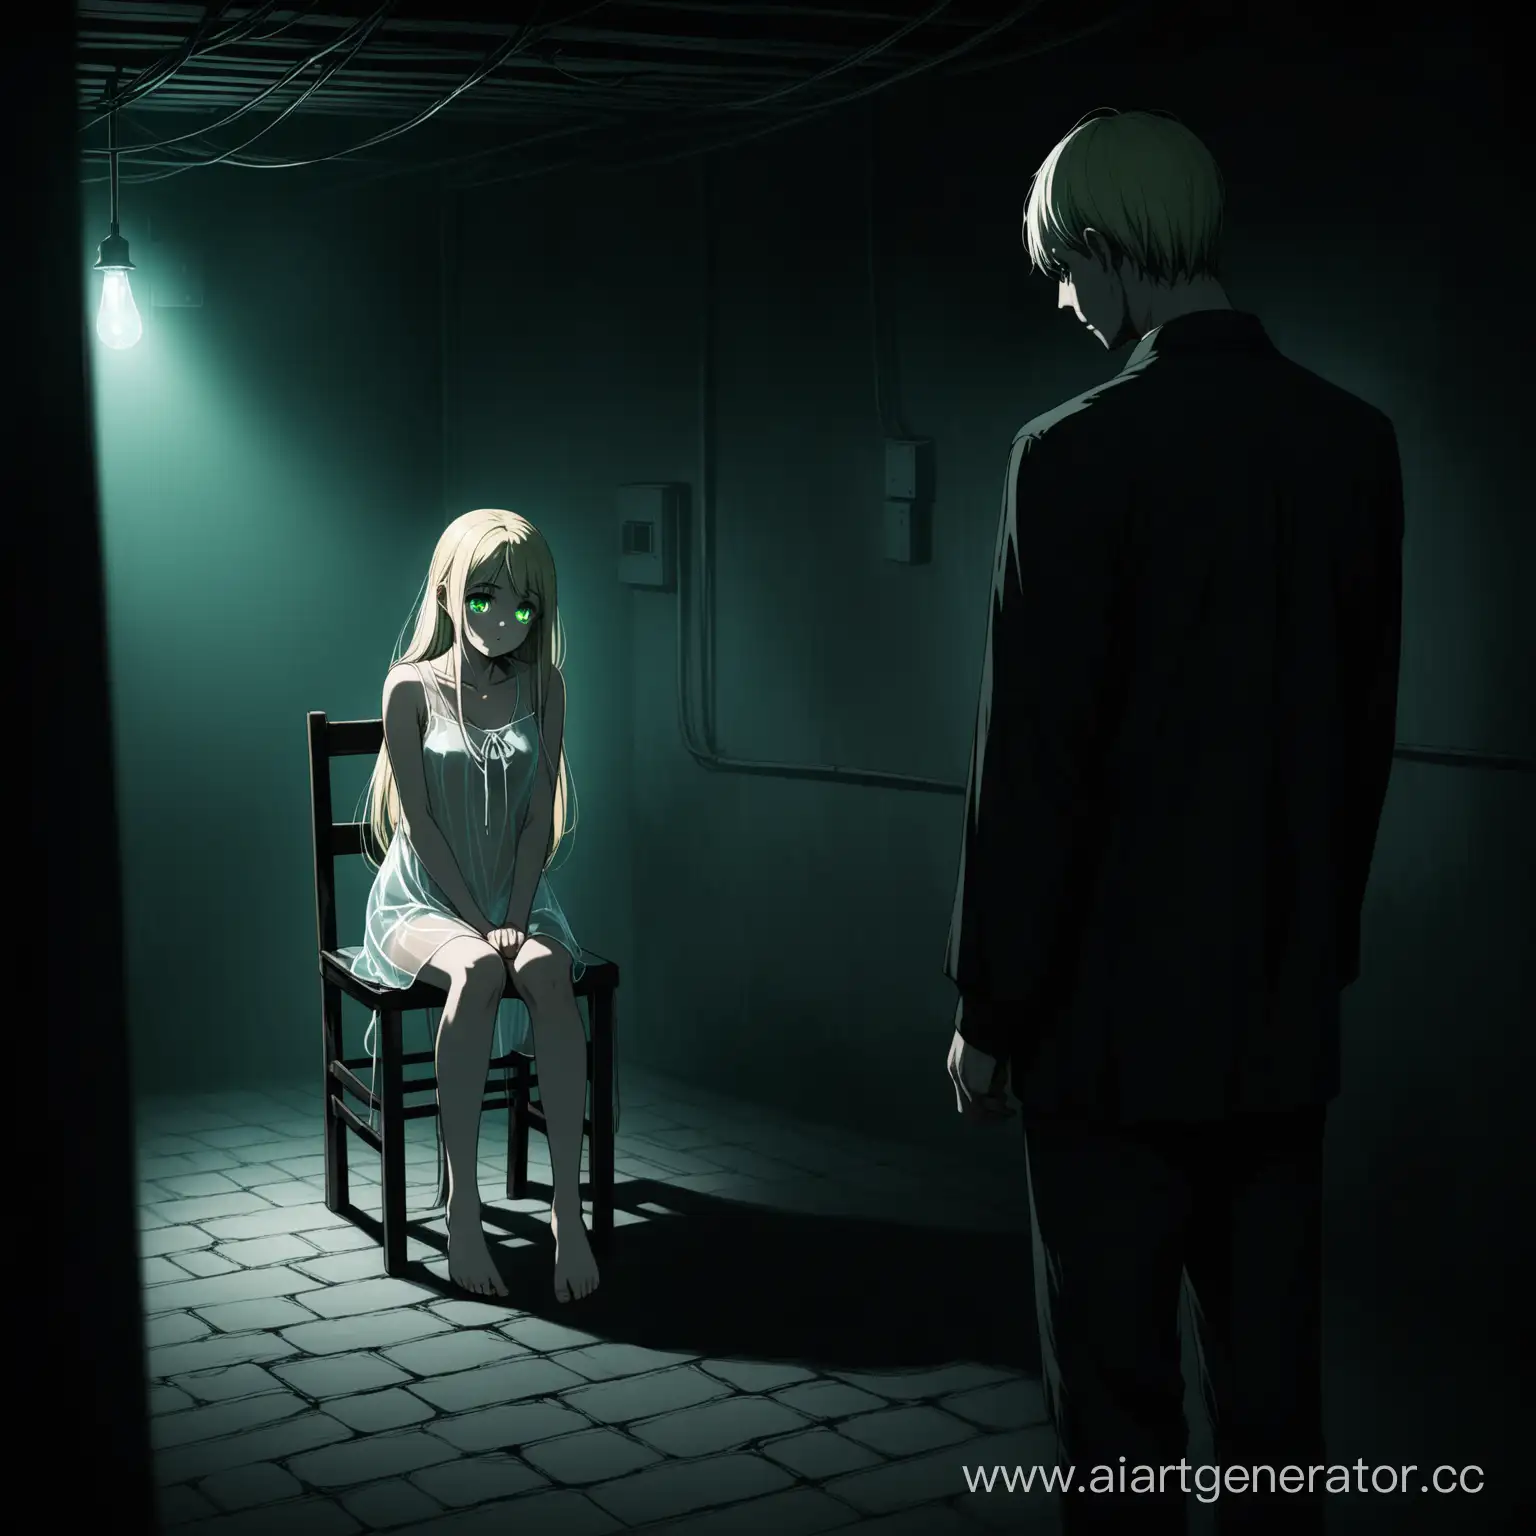 Captivity-of-a-Young-Blonde-Girl-by-a-Tall-Dark-Figure-in-Basement